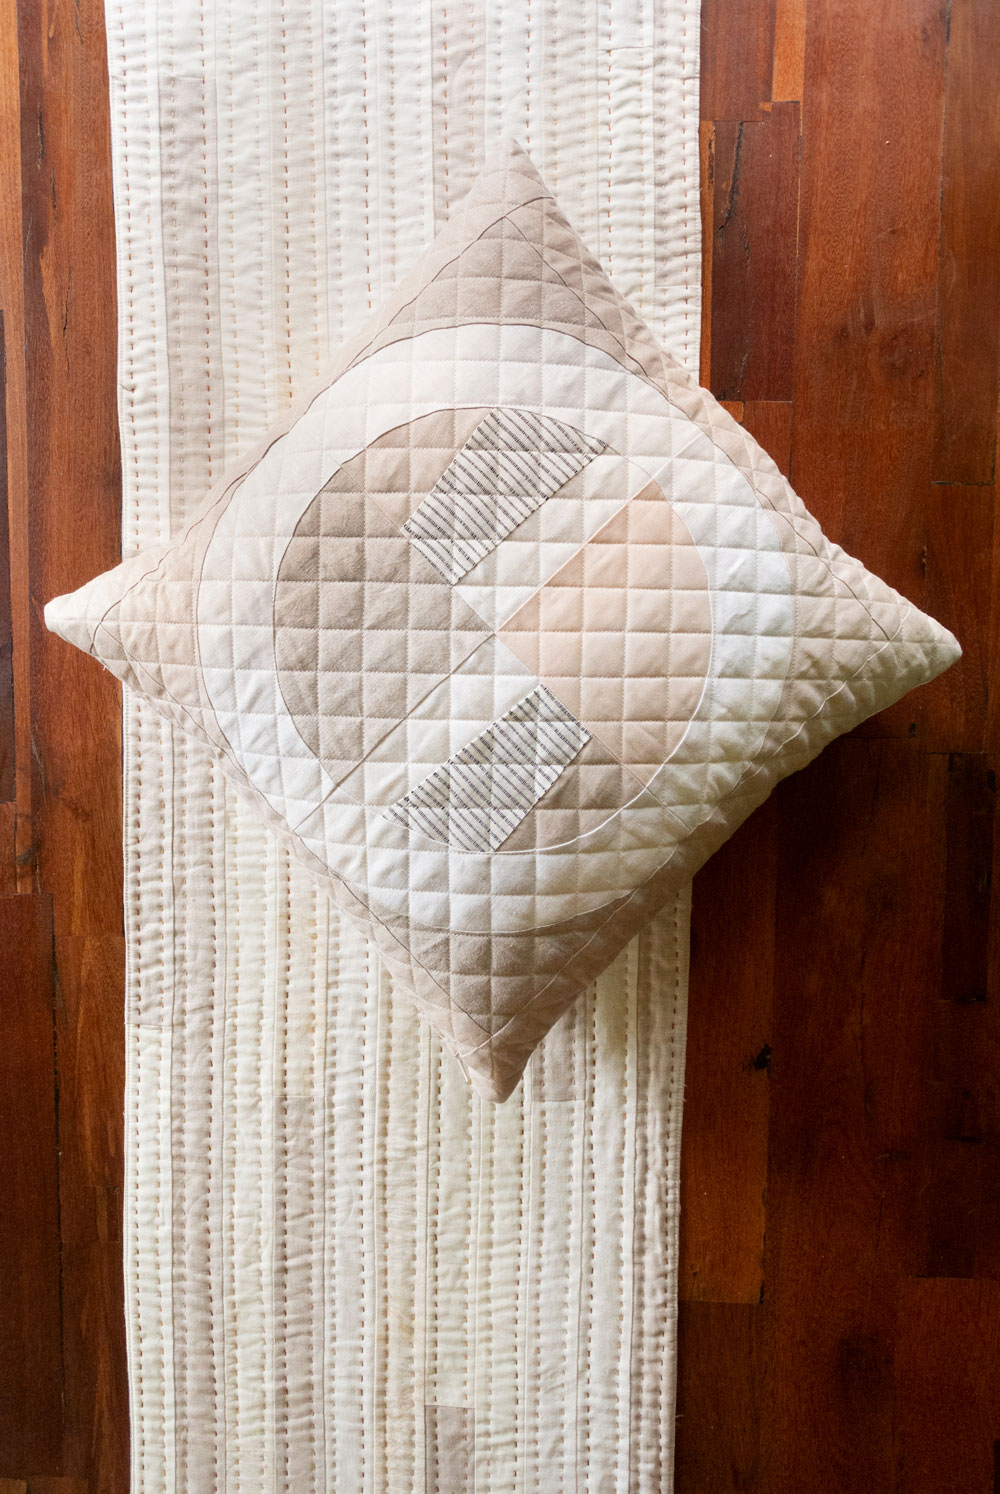 3 fun and fresh quilted pillow patterns for a modern look. Easy to follow patterns that are fat quarter friendly or use up scraps!